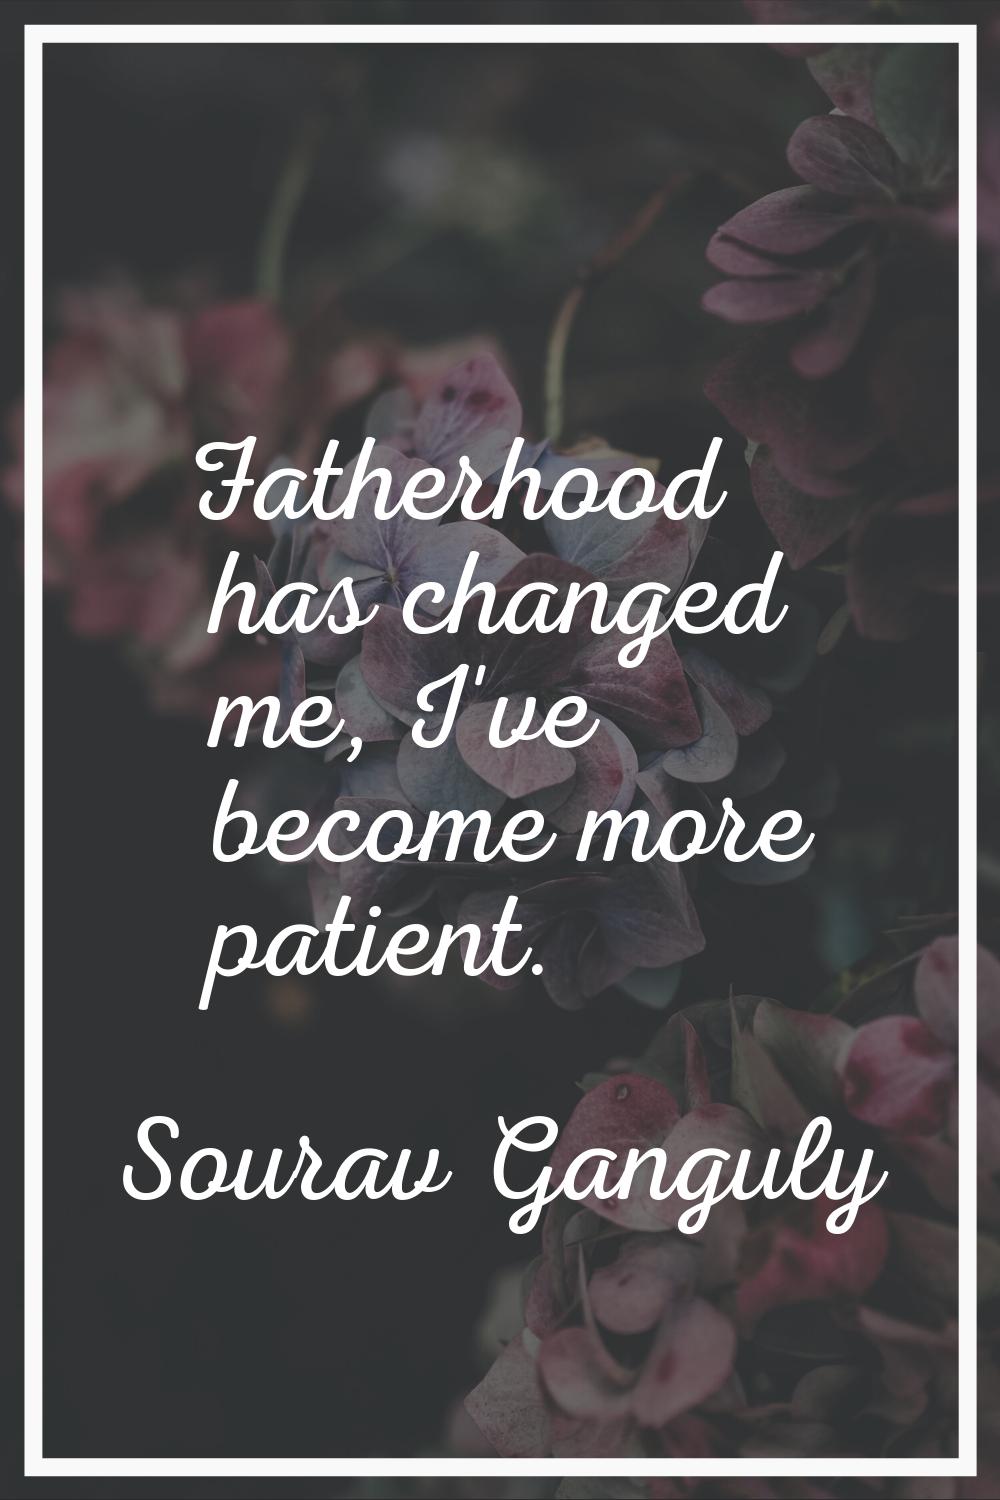 Fatherhood has changed me, I've become more patient.